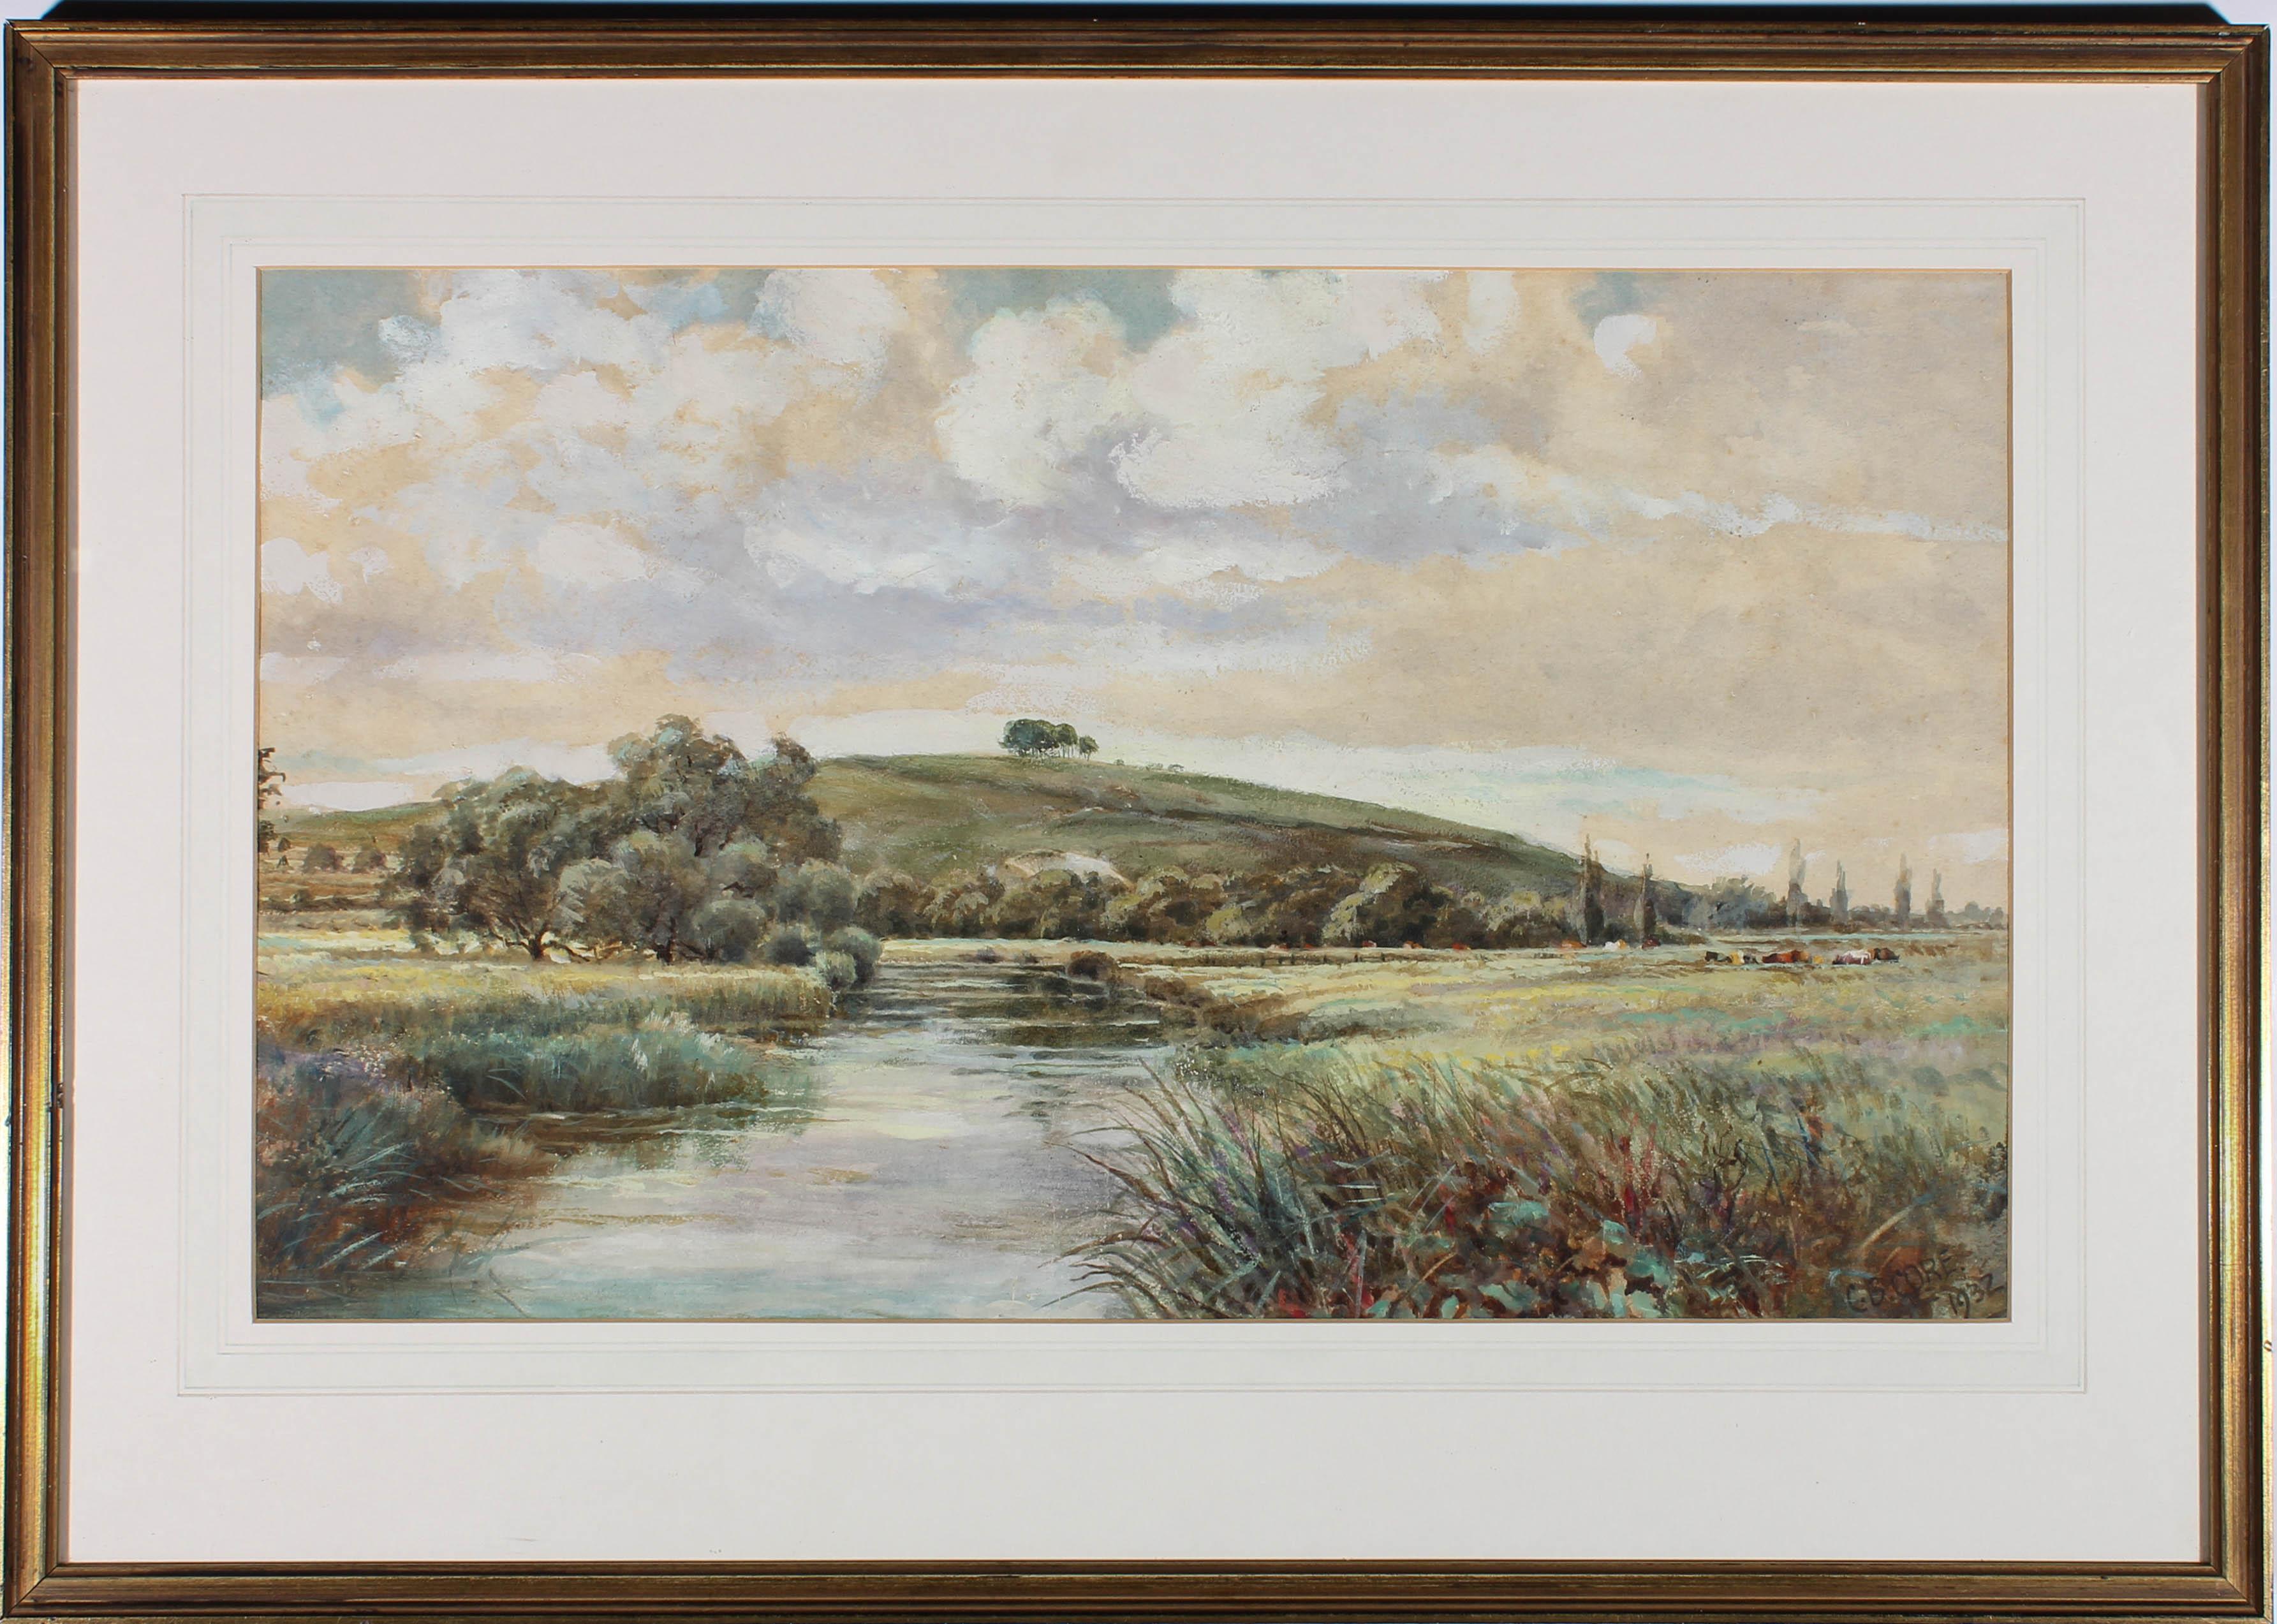 This charming landscape scene depicts a river winding through a meadow where cows are grazing. Painted in fine watercolour detail. Signed and dated to the lower right. Presented in a glazed gilt frame and white card mount. On paper.